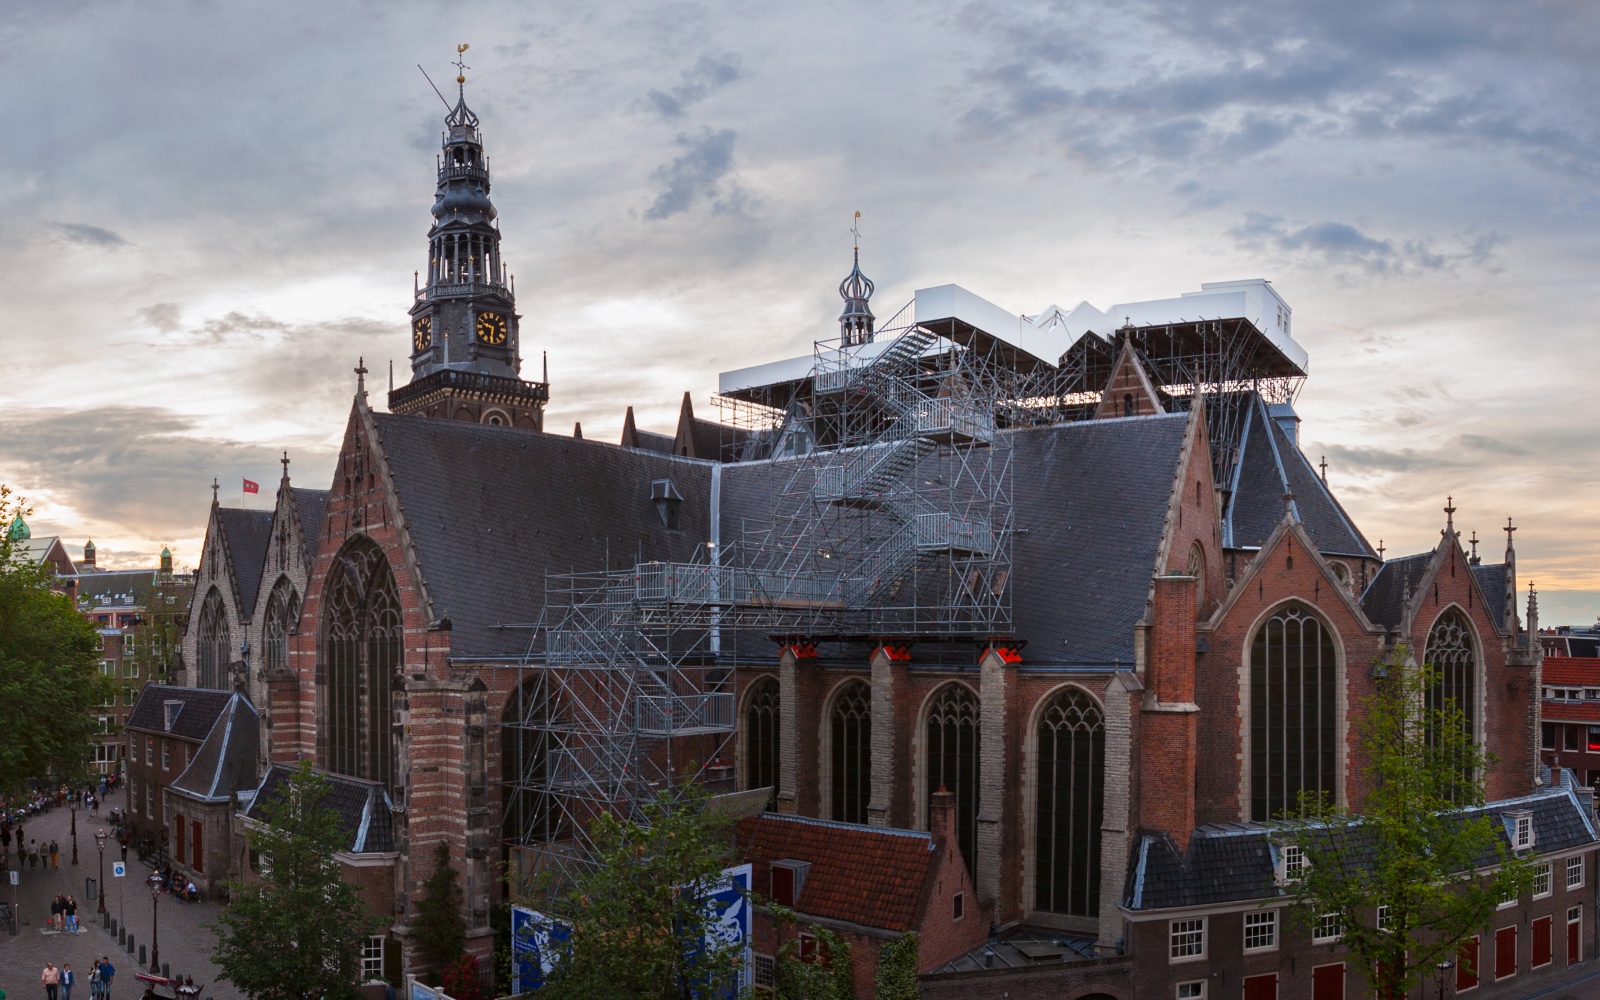 New to Amsterdam: Architectural Intervention on the City’s Oldest Rooftop